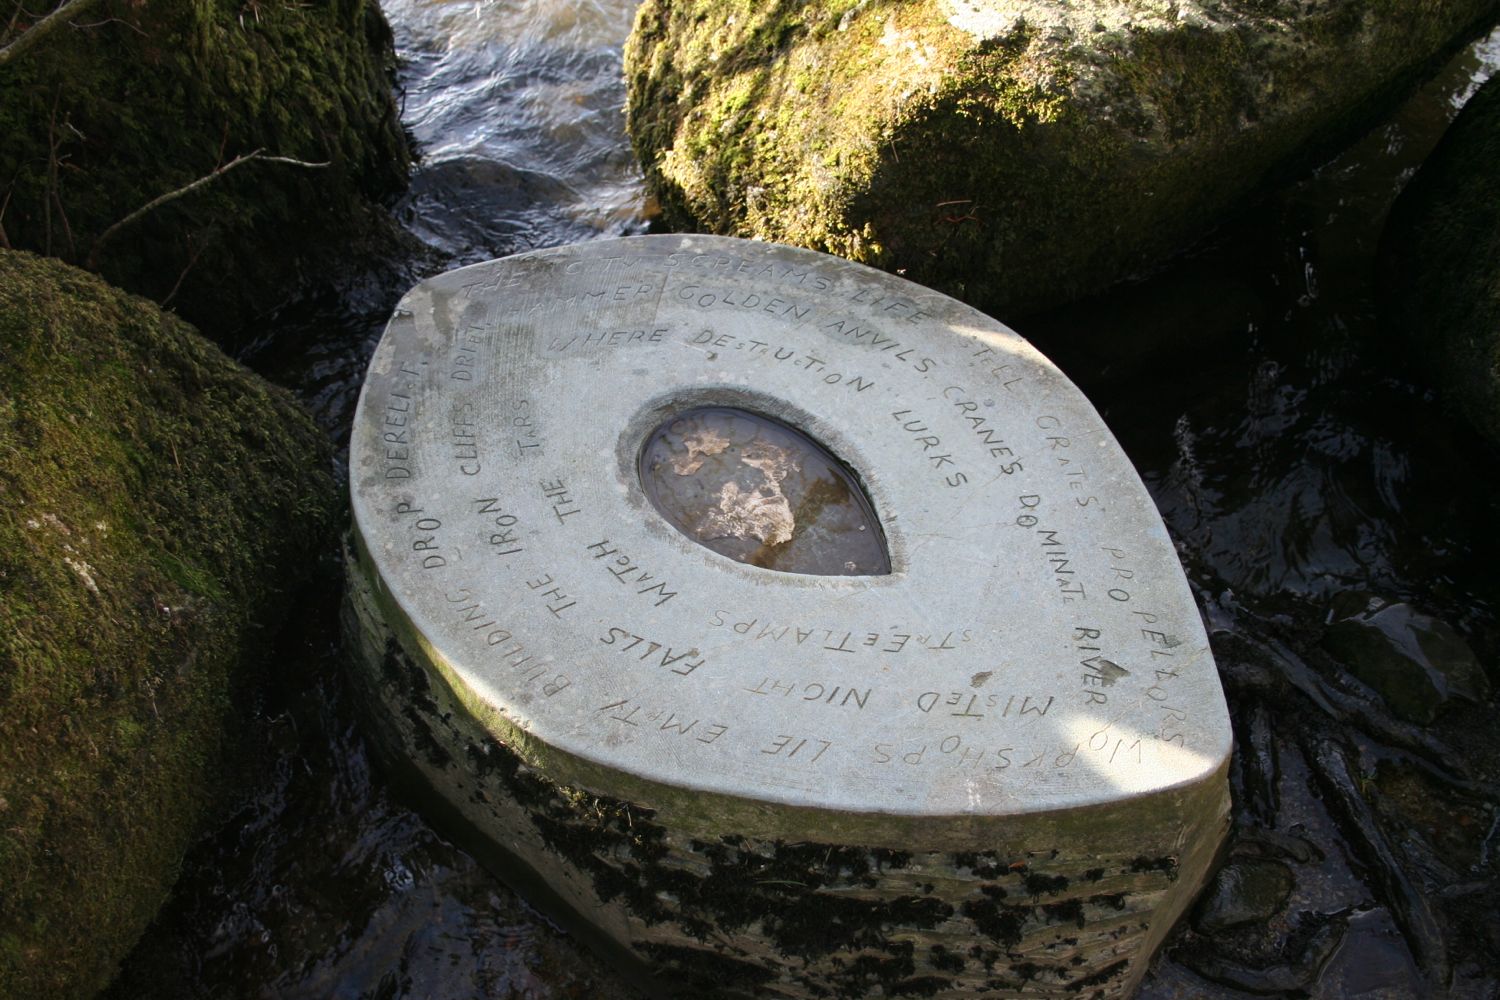 Sculpture on a rock in the Lake itself